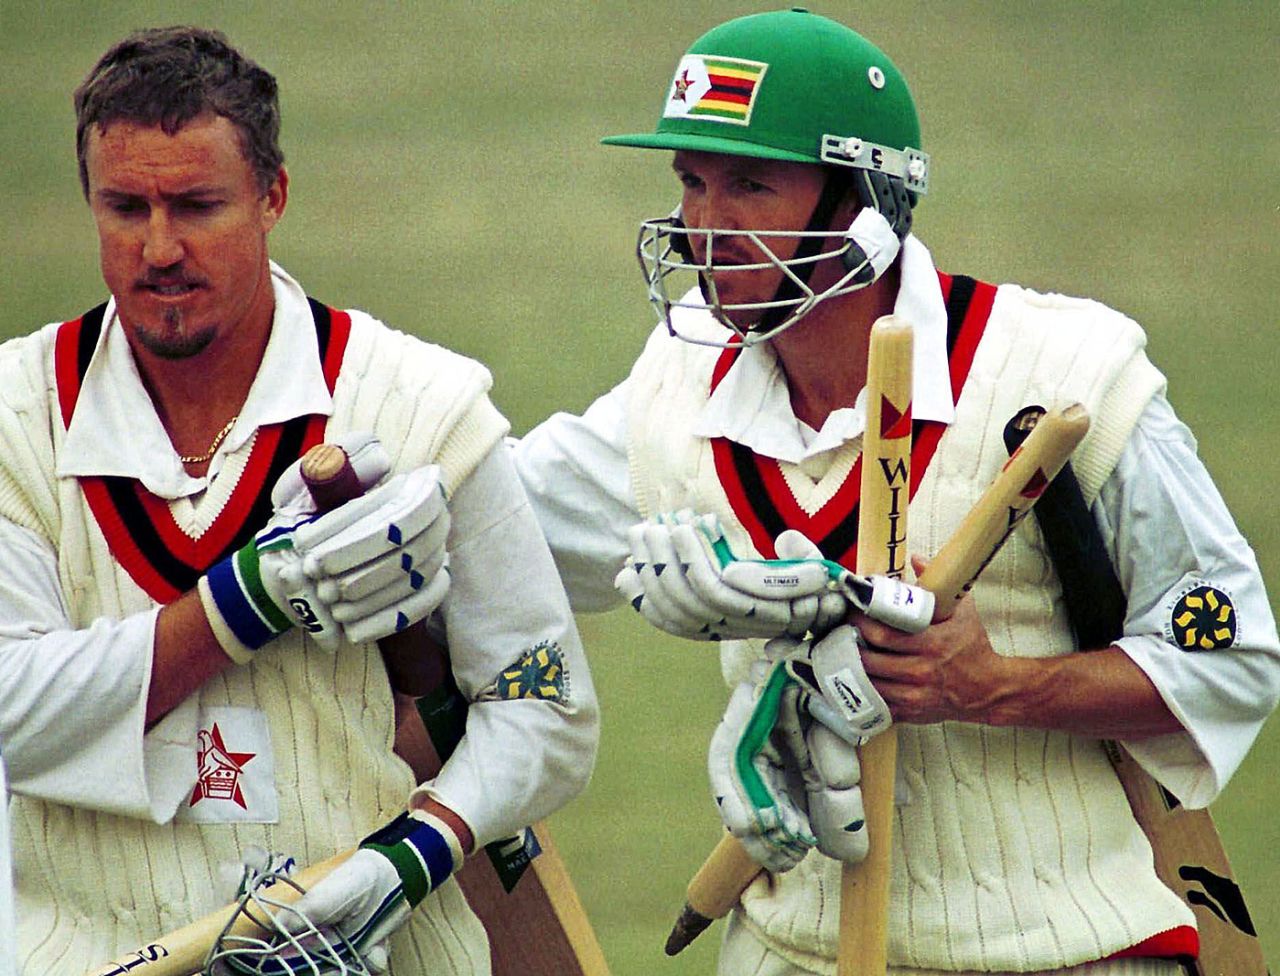 Murray Goodwin and Andy Flower seal the win against Pakistan, Pakistan v Zimbabwe, 1st Test, Peshawar, 4th day, November 30, 1998